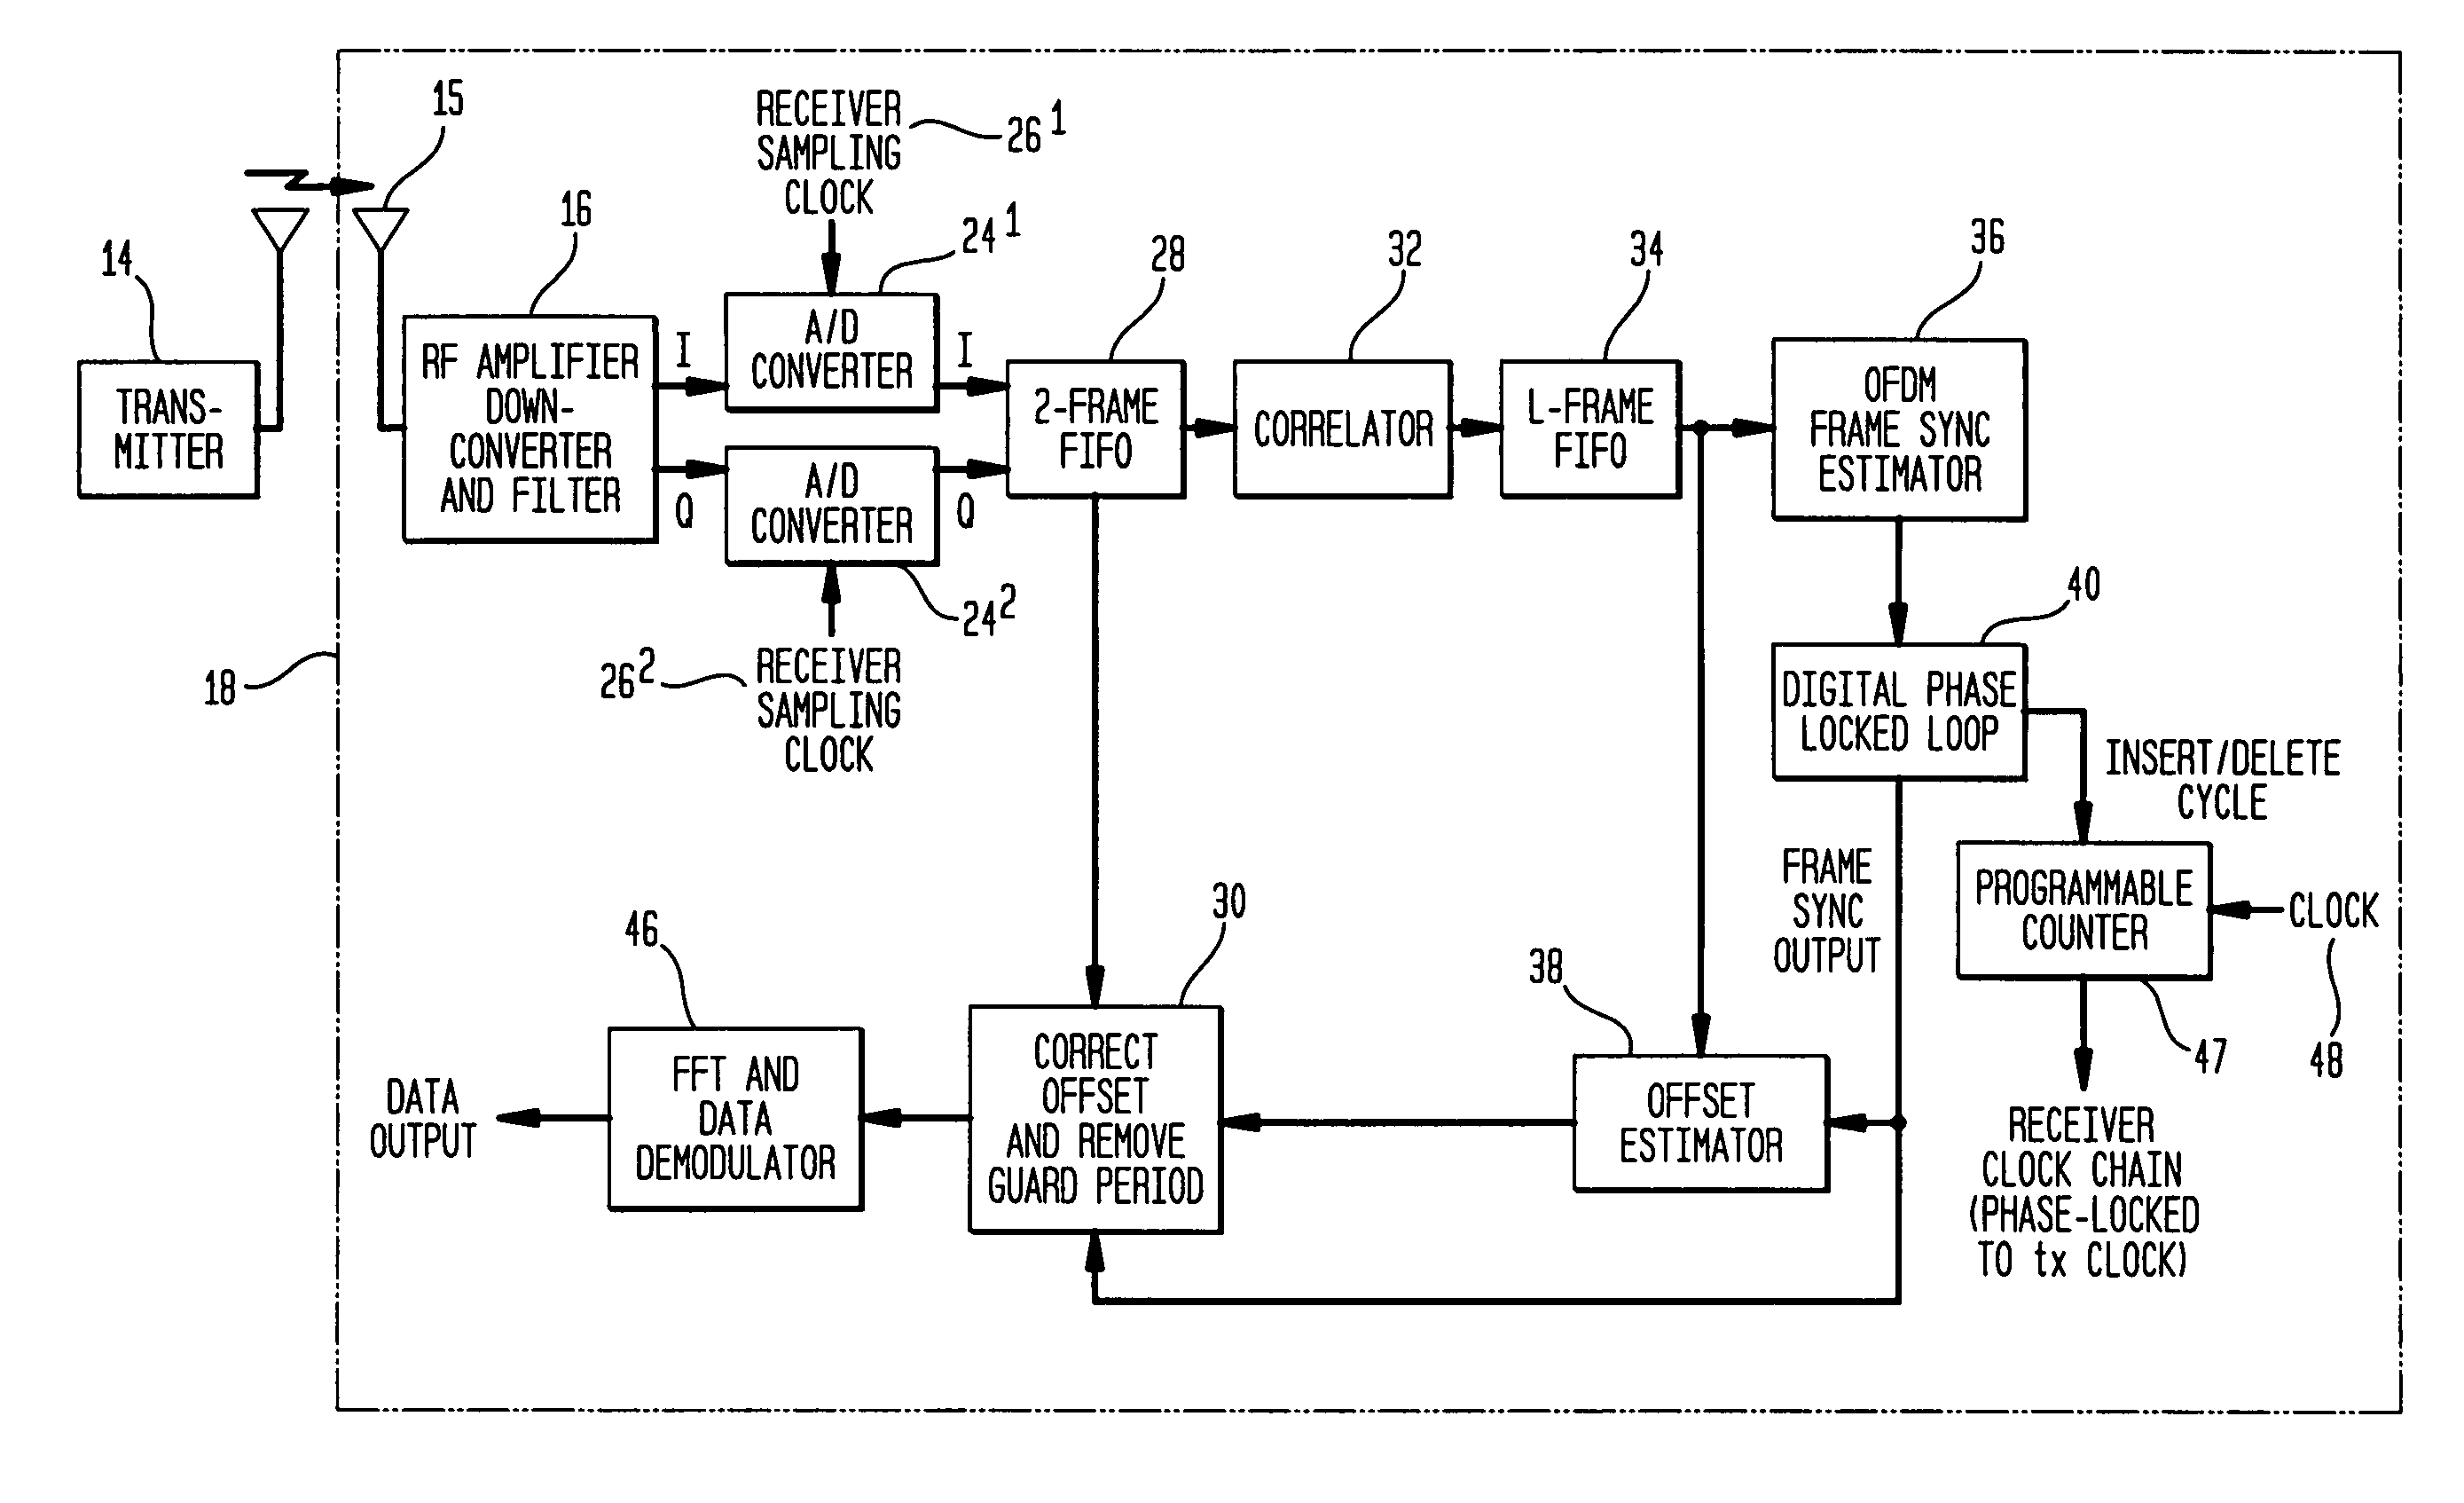 In-band-on-channel (IBOC) system and methods of operation using orthogonal frequency division multiplexing (OFDM) with timing and frequency offset correction